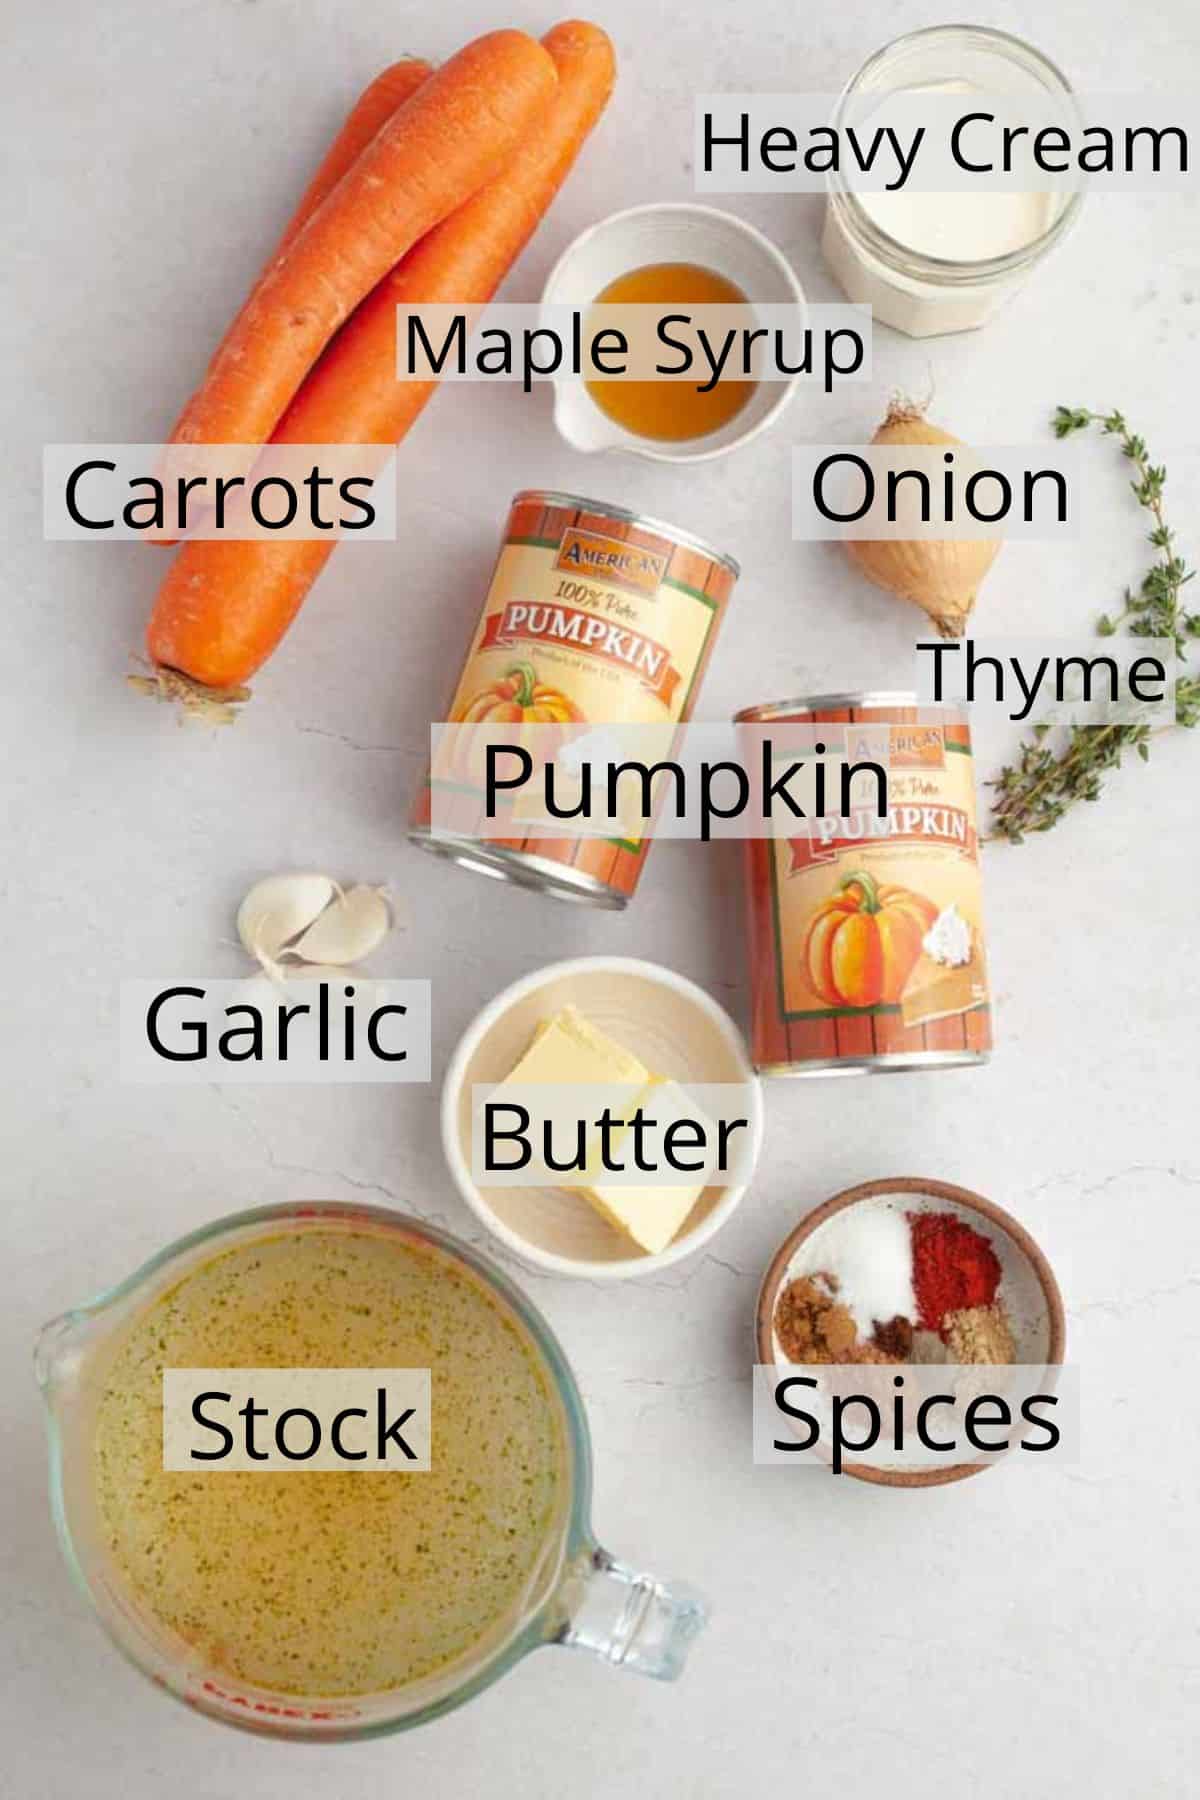 All the ingredients needed for pumpkin carrot soup on a white marble counter.